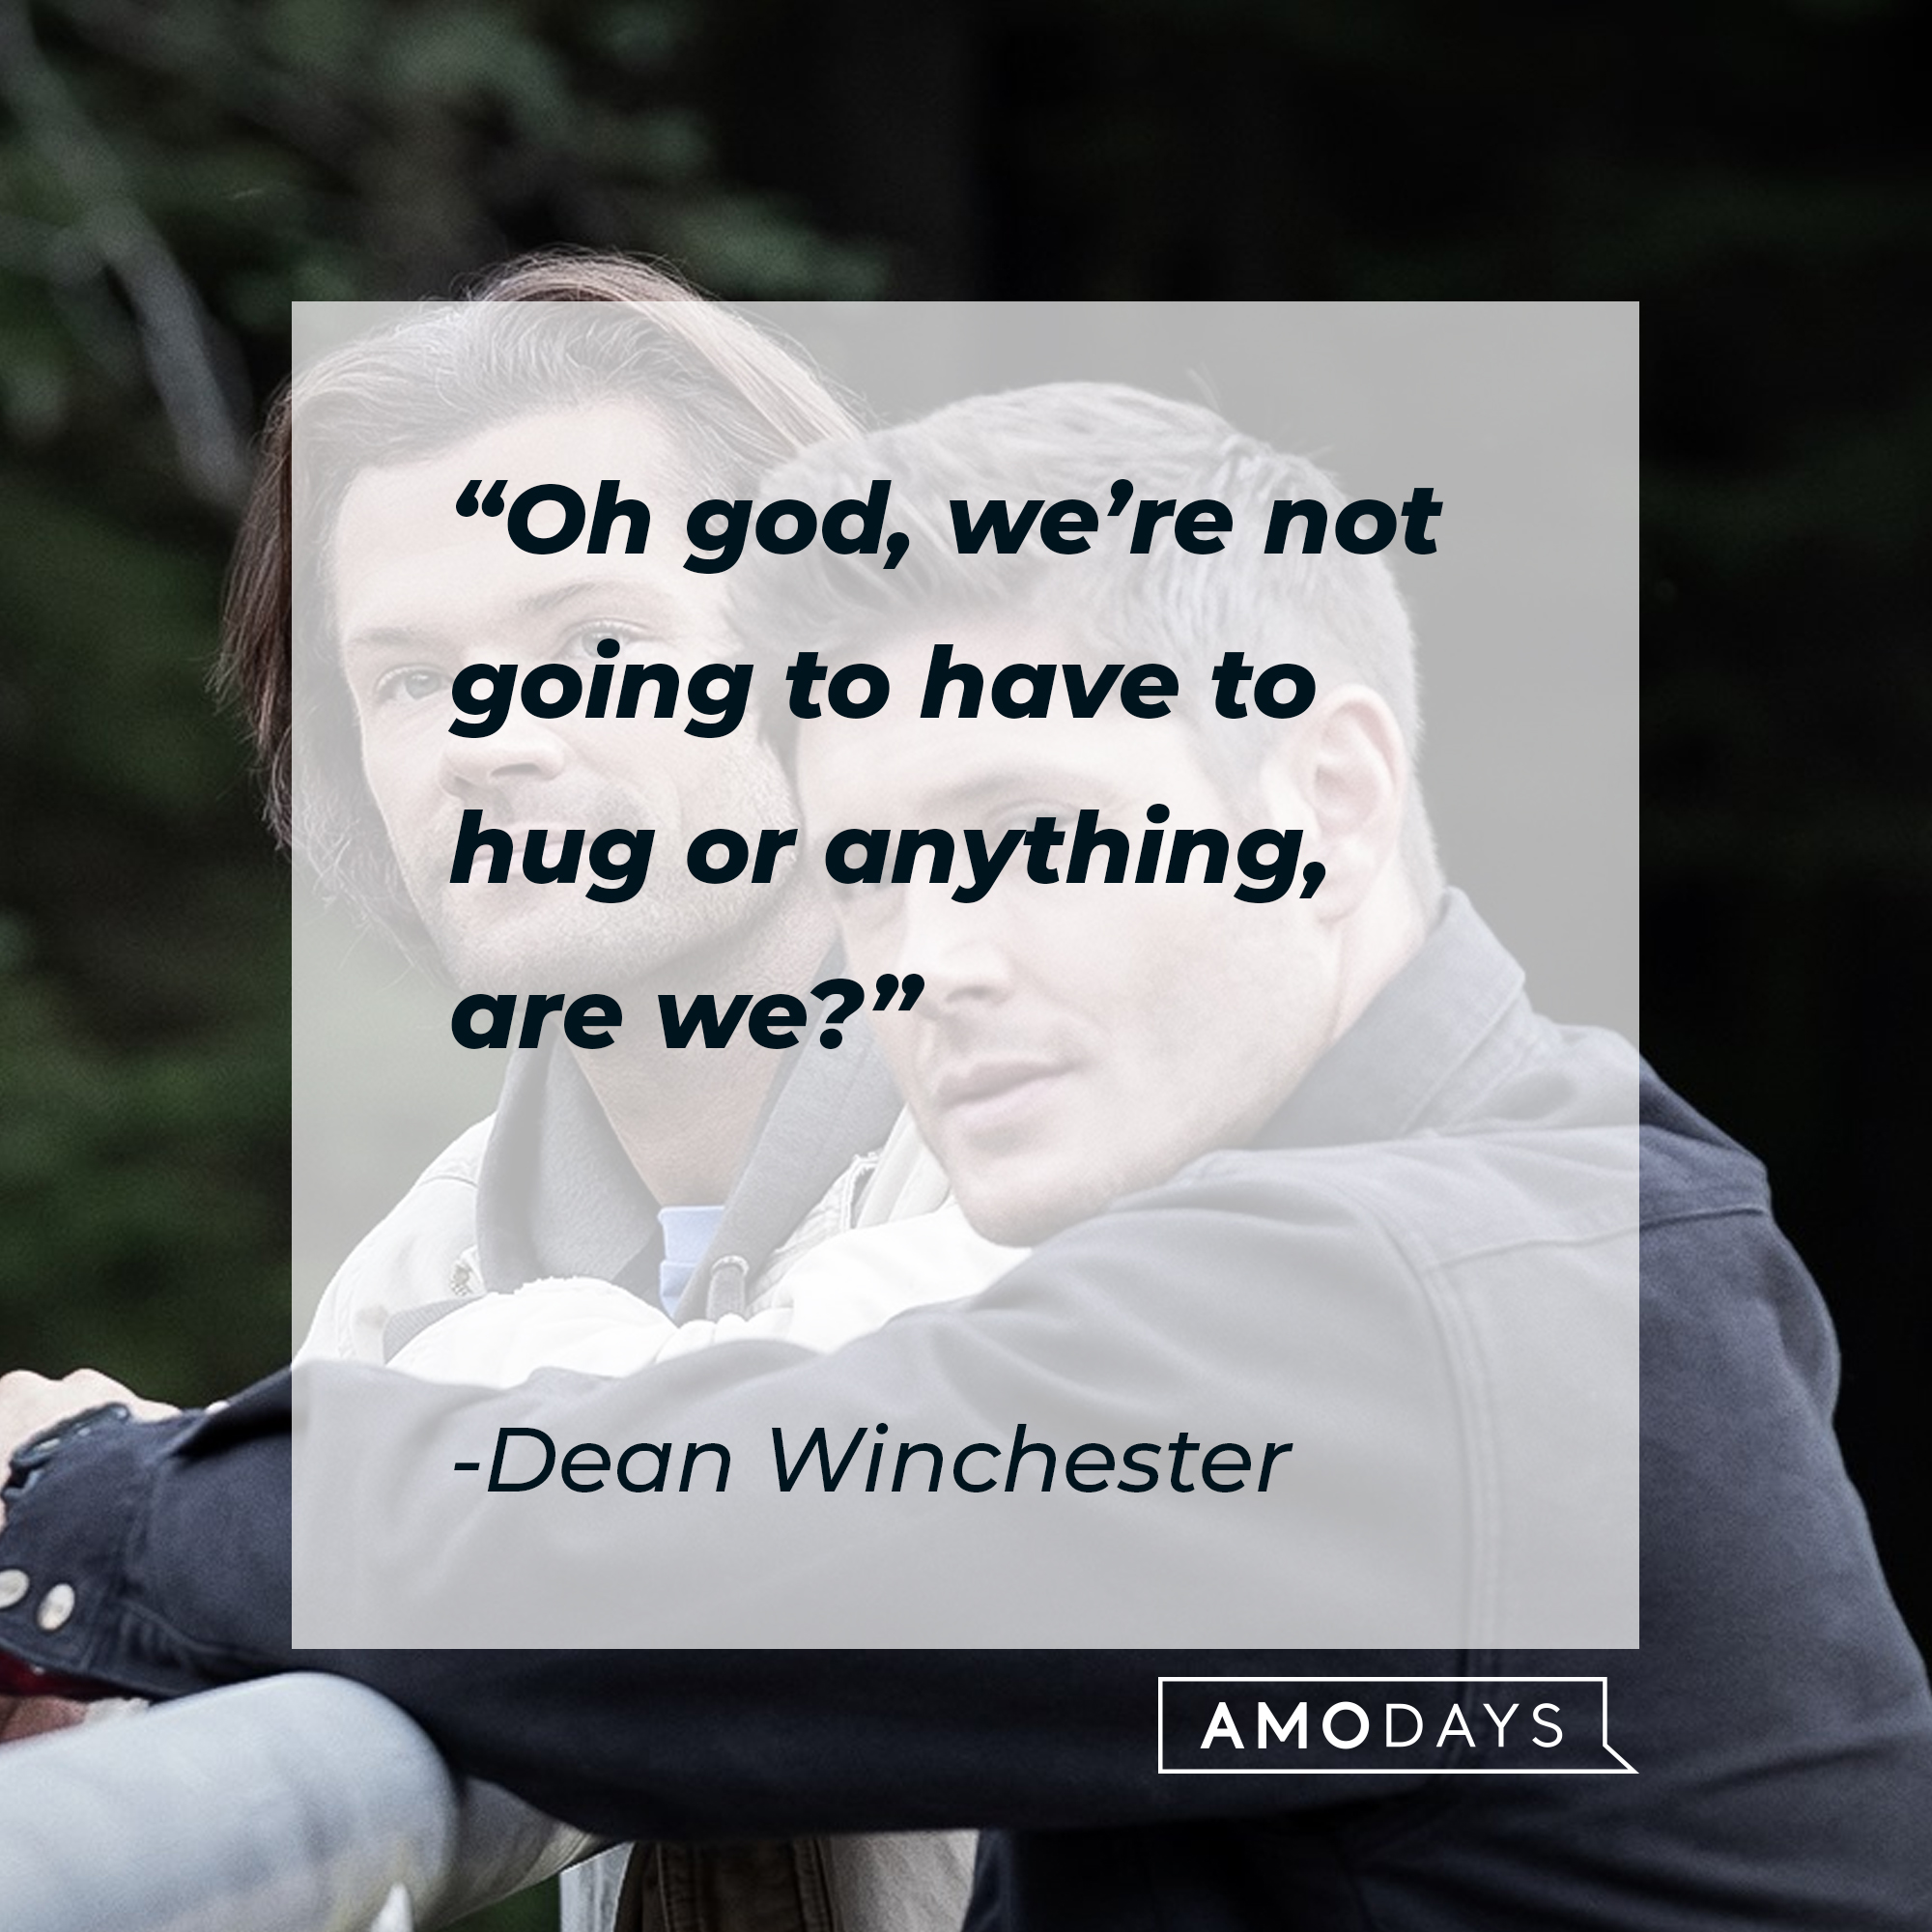 Dean Winchester's quote: "Oh god, we’re not going to have to hug or anything, are we?" | Source: facebook.com/Supernatural